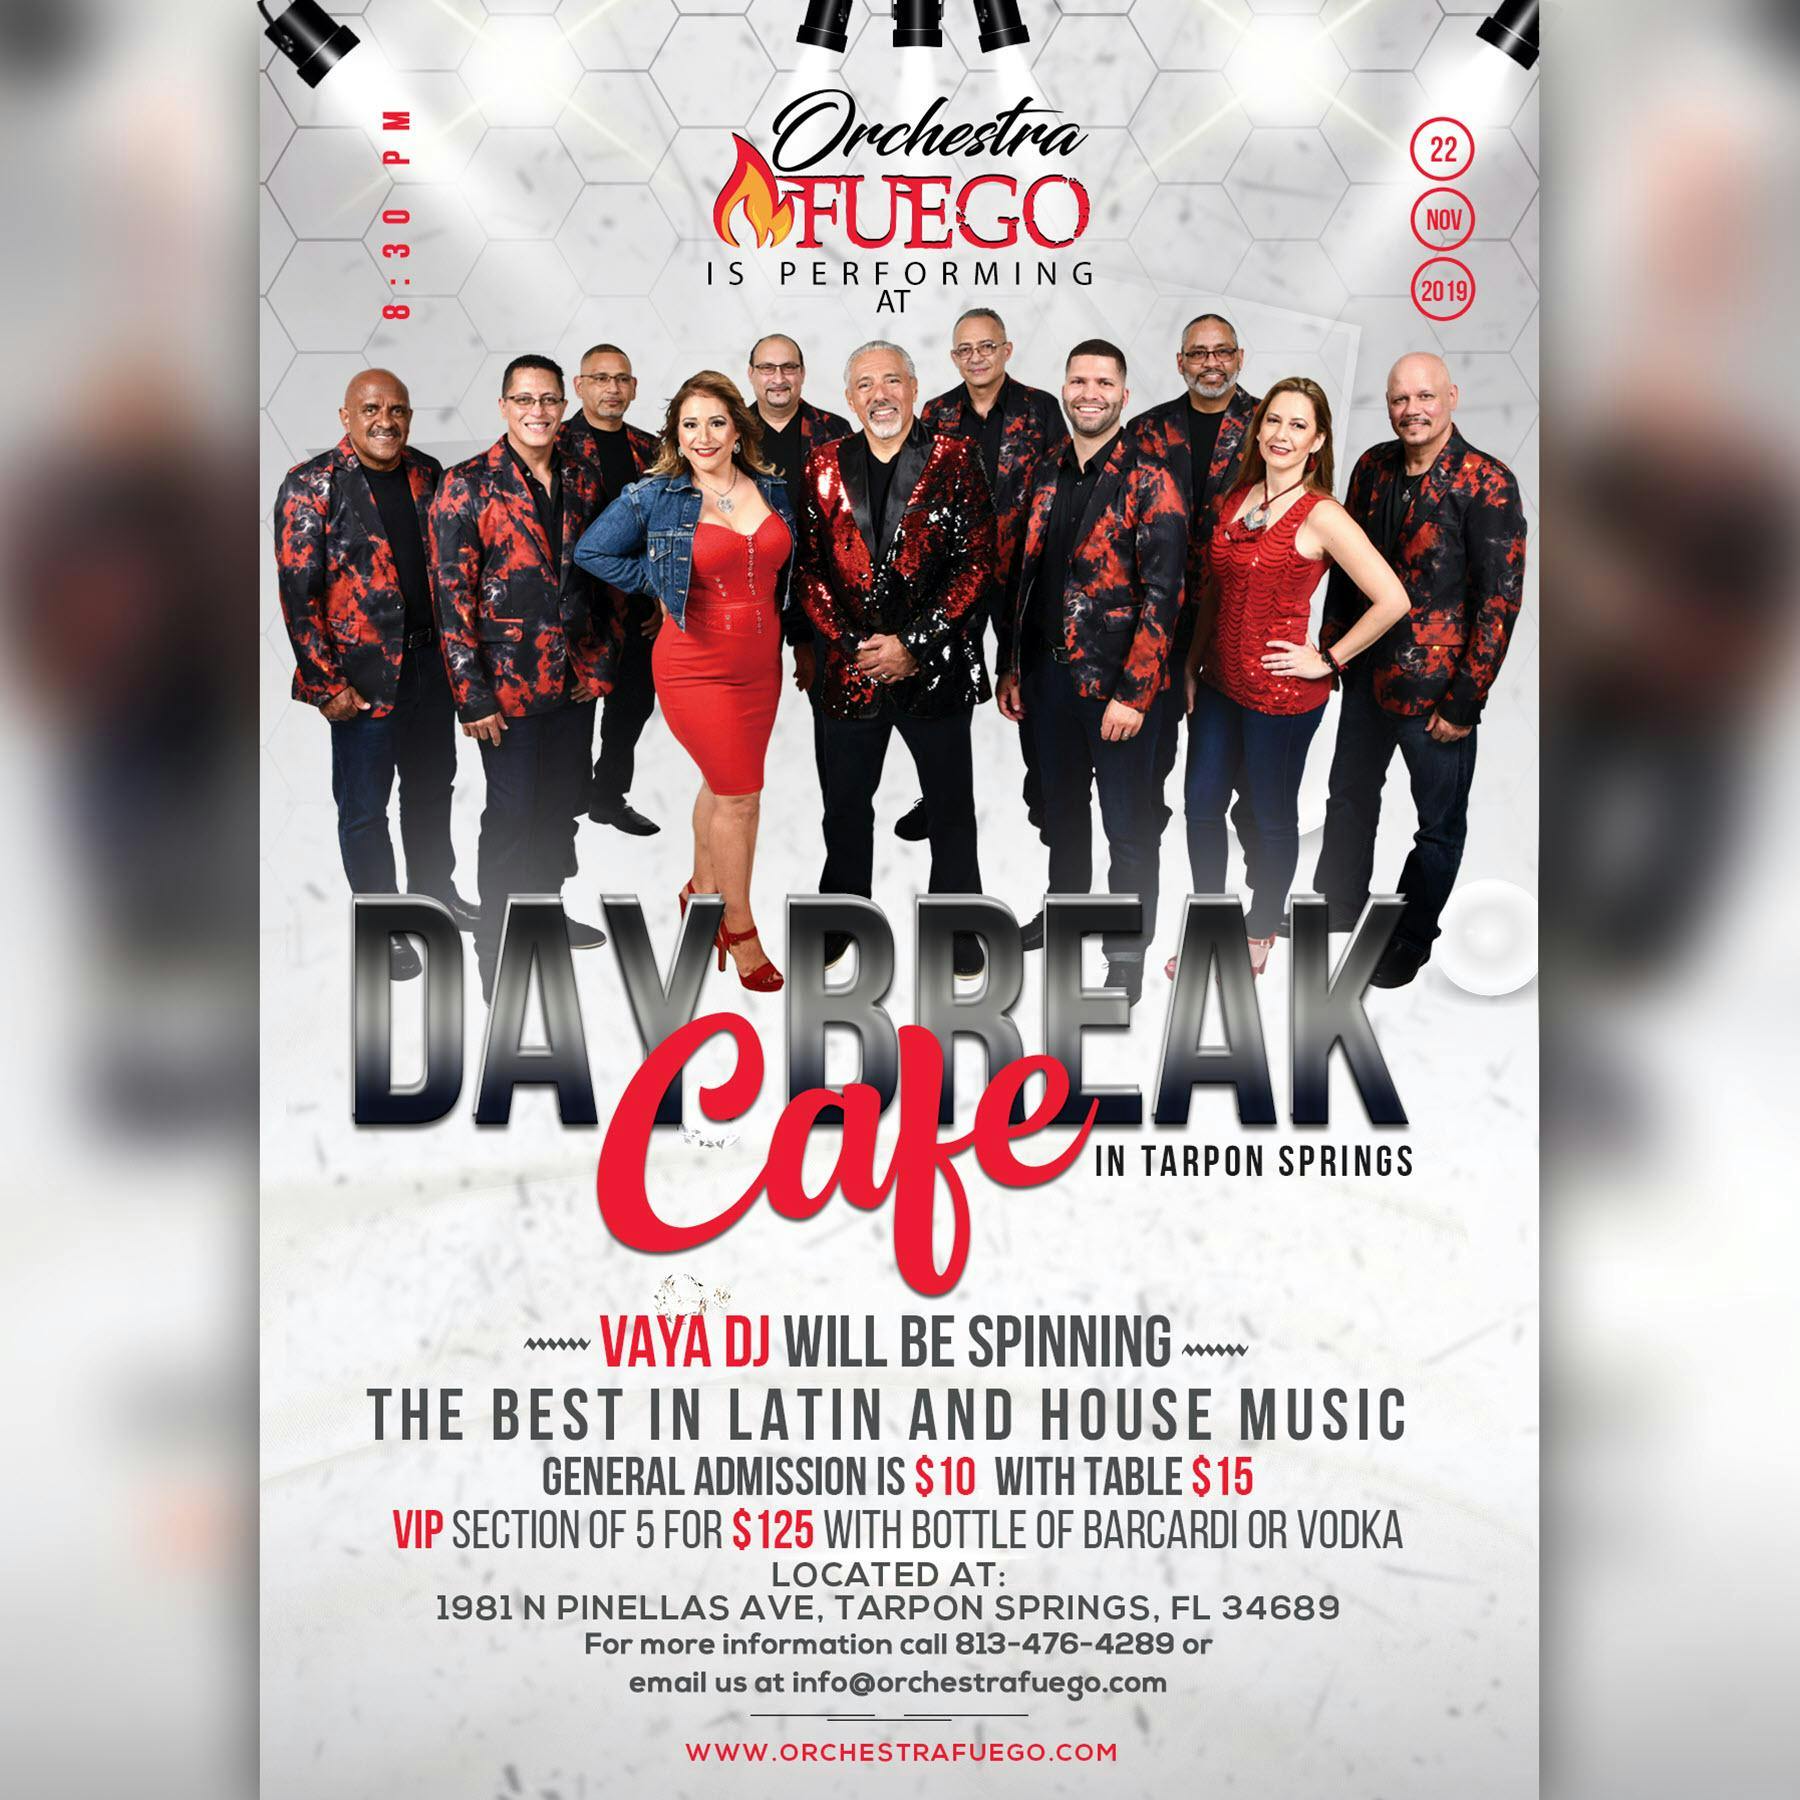 Orchestra Fuego live December 13 at the Day Break cafe